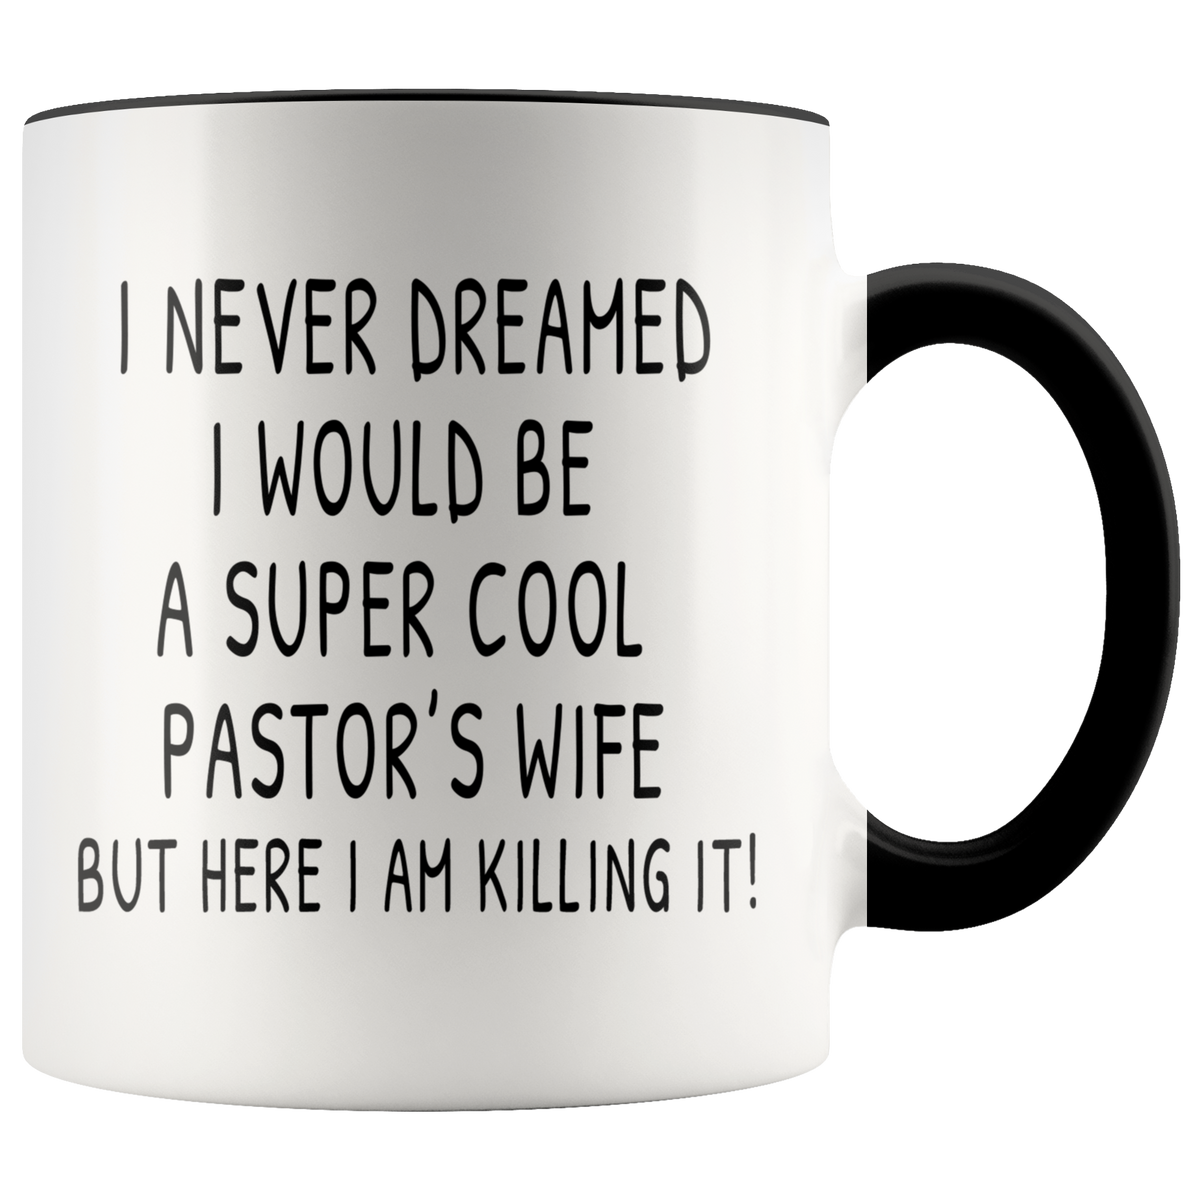 Funny Pastor's Wife Appreciation Gift Mug - I Never Dreamed I Would Be A Super Cool Pastor's Wife Accent Coffee Mug 11oz